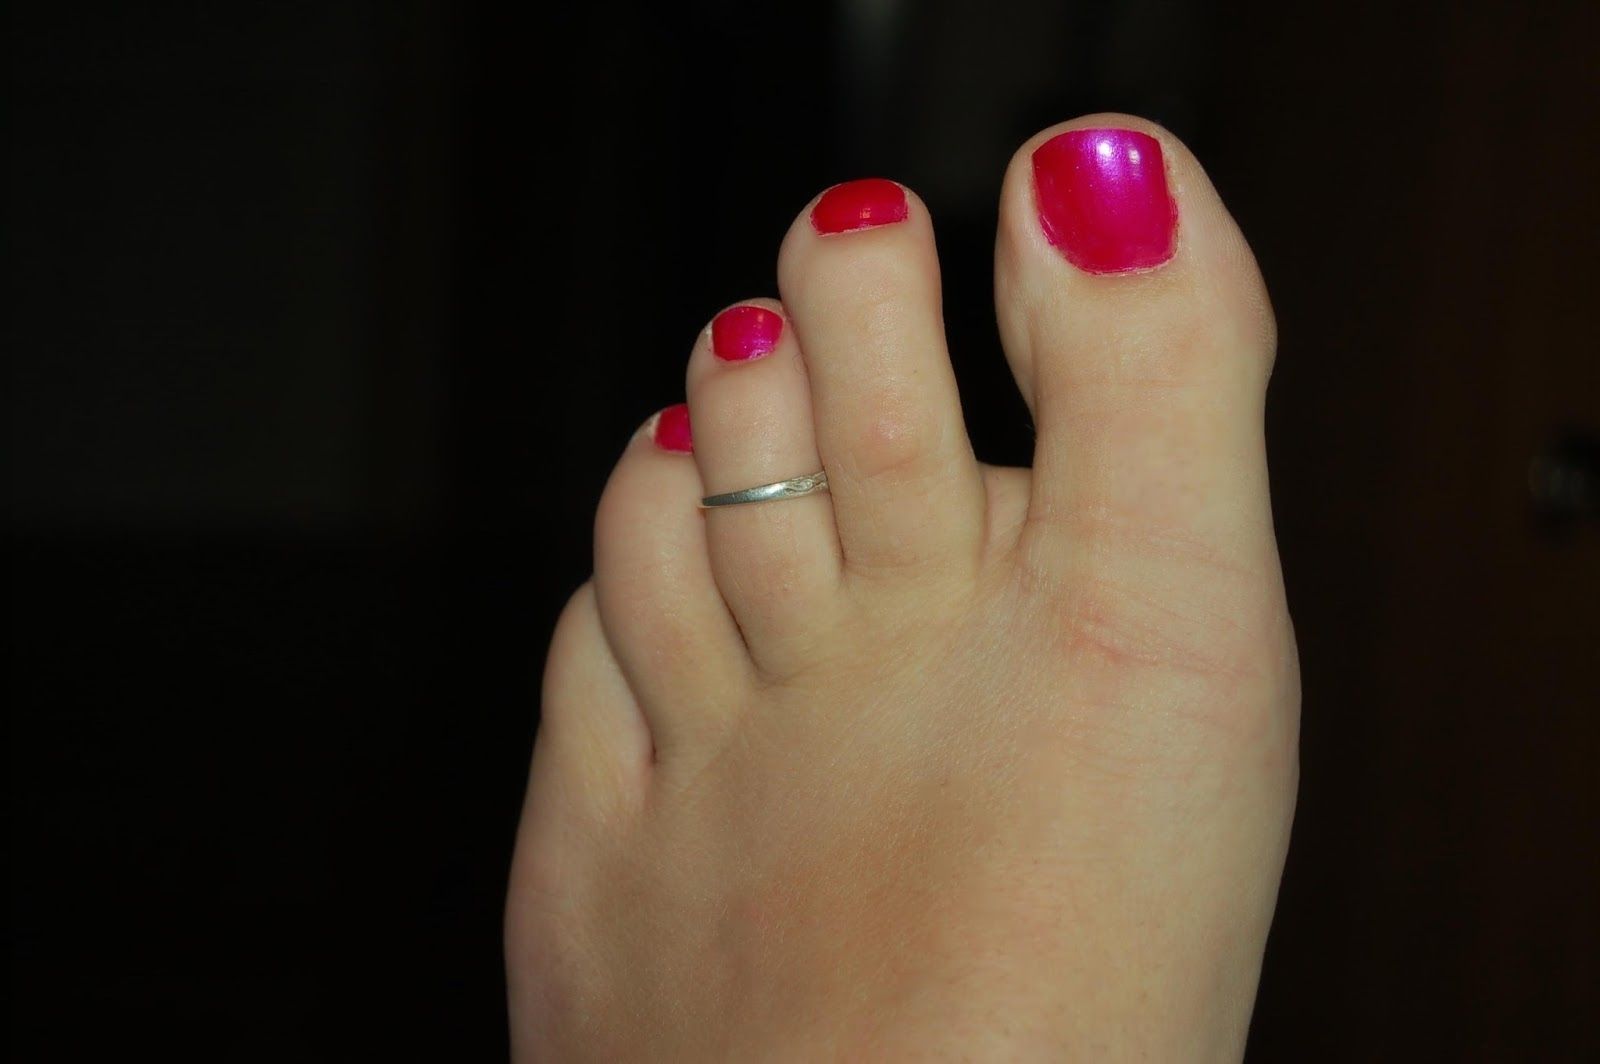 It's Ok For Men To Have Painted Nails In Public: What About Toe Within Most Popular Cute Toe Rings (View 2 of 15)